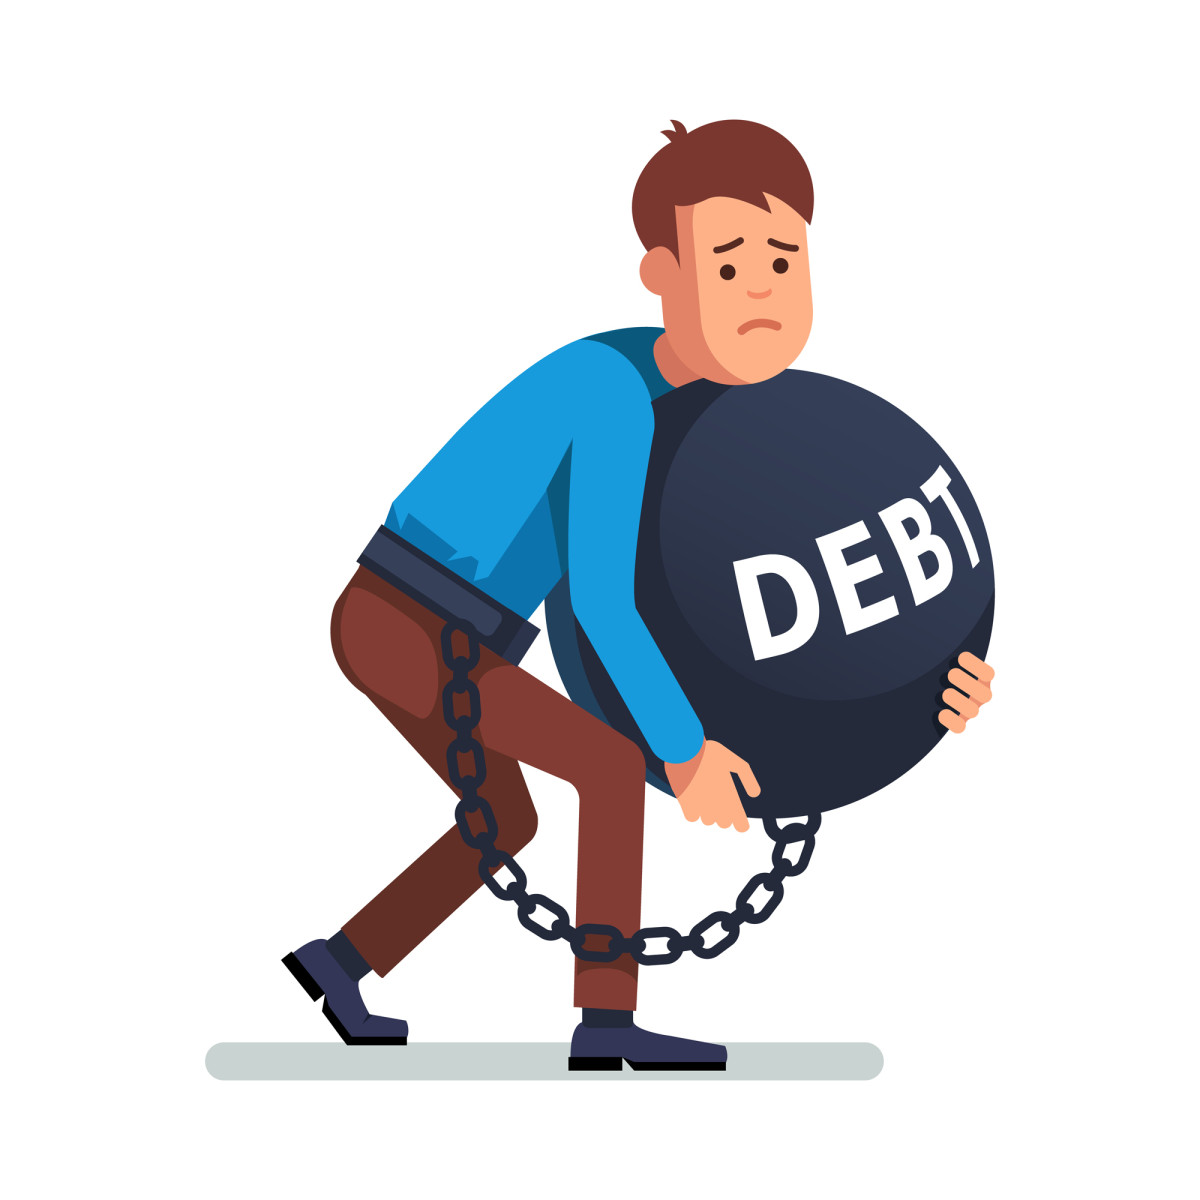 Debts: How to Manage Them and Obtain Financial Freedom